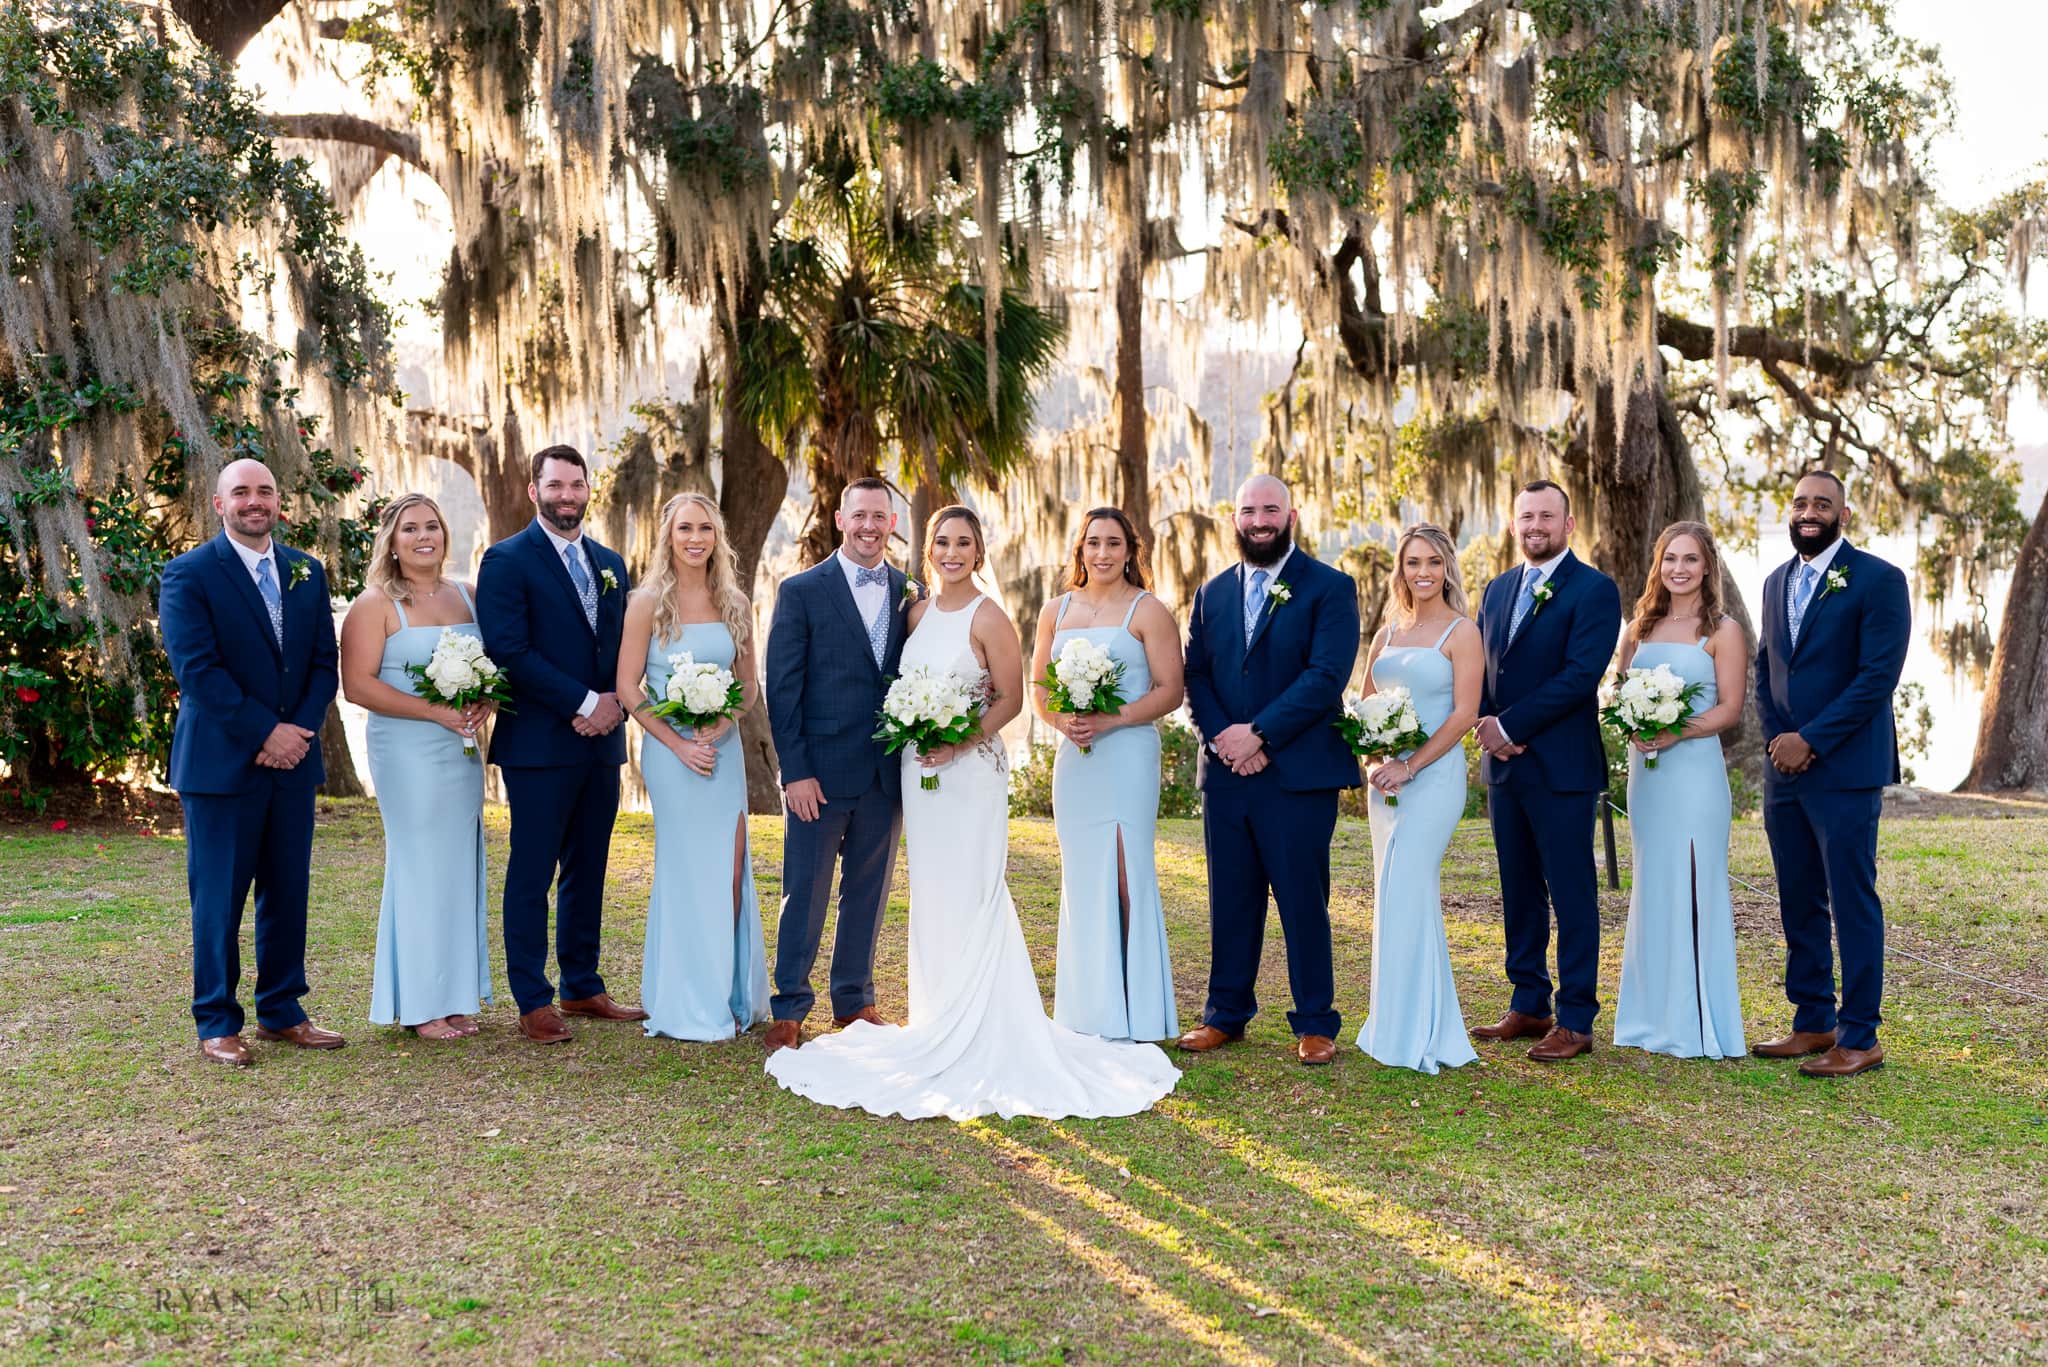 Bridal party portrait by the oaks - Kimbels at Wachesaw Plantation